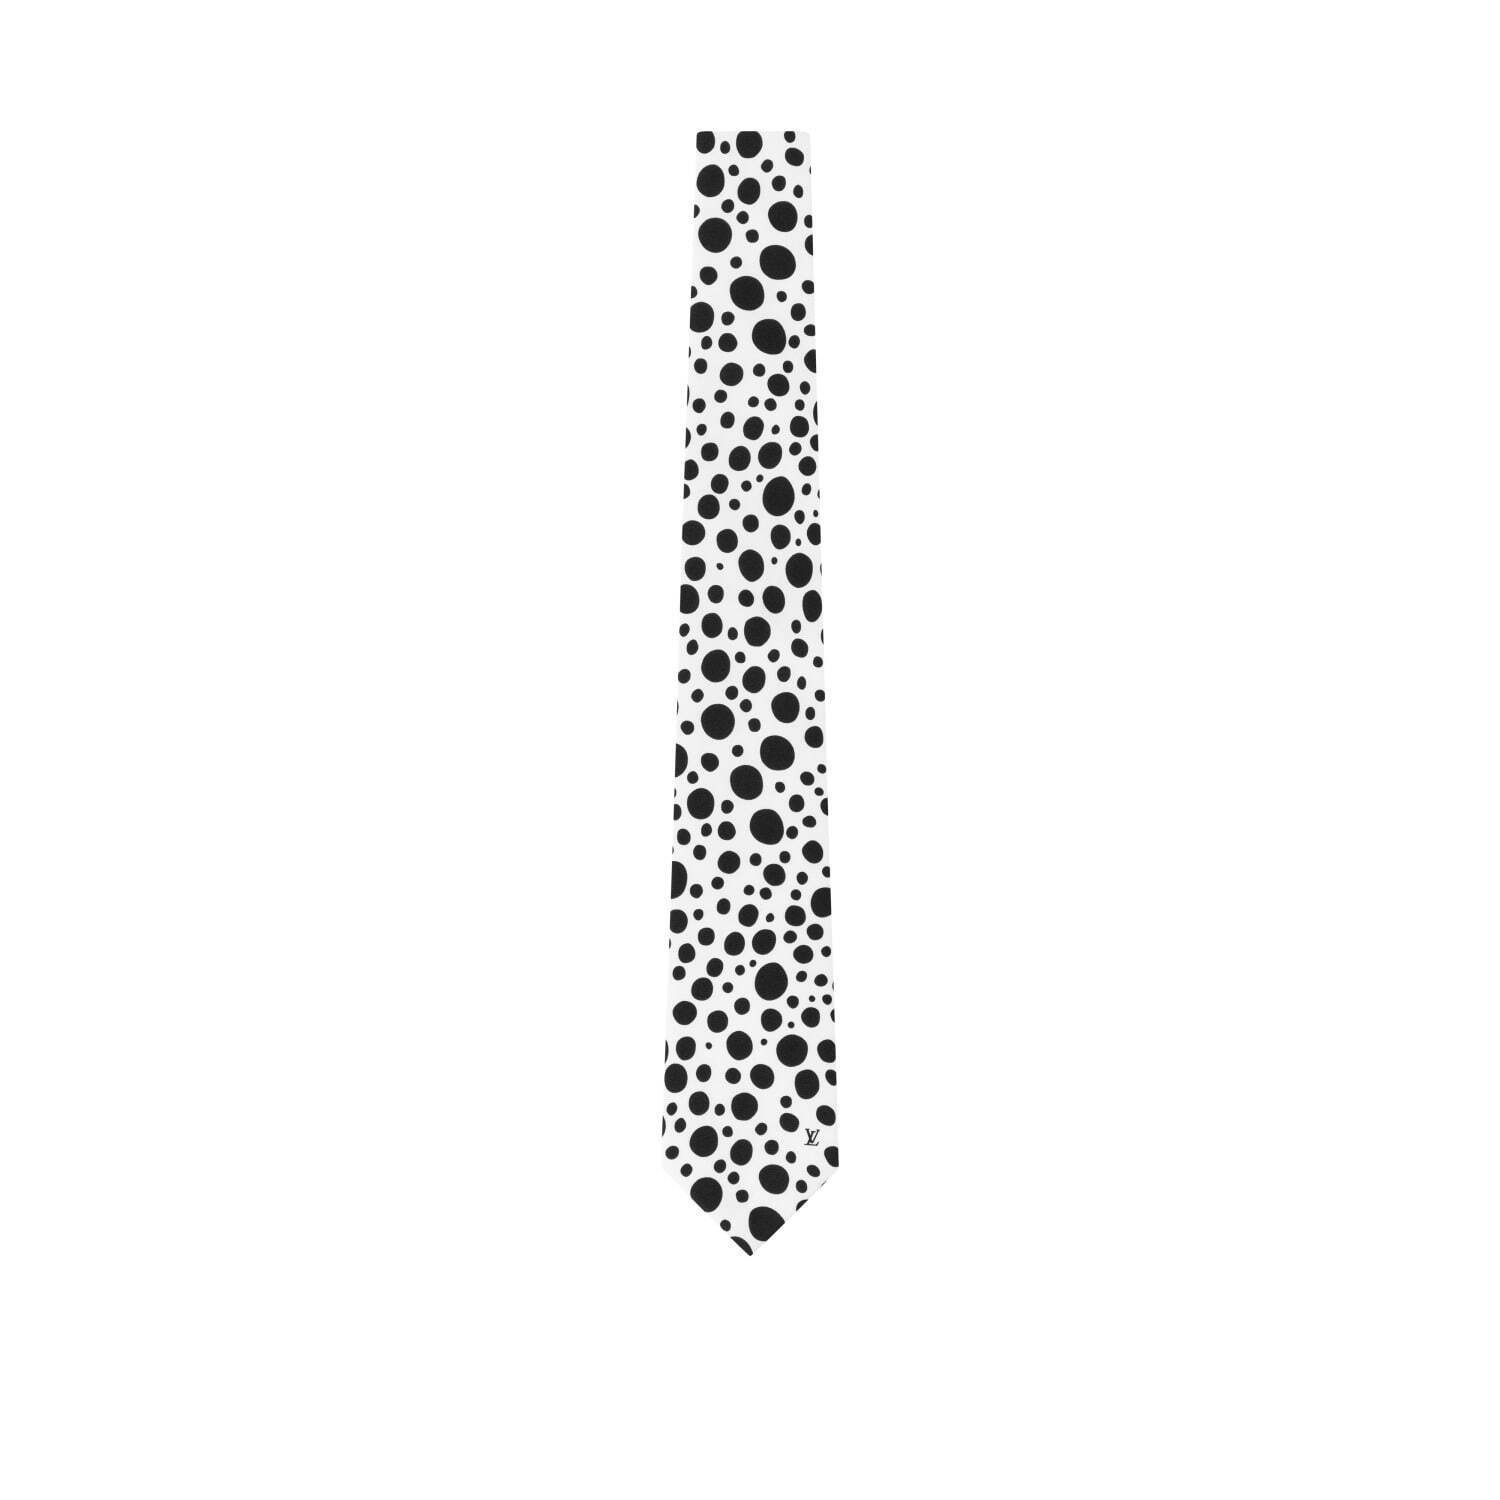 Louis Vuitton Launches Yayoi Kusama Collaboration With Global Ad Campaign -  EnVi Media